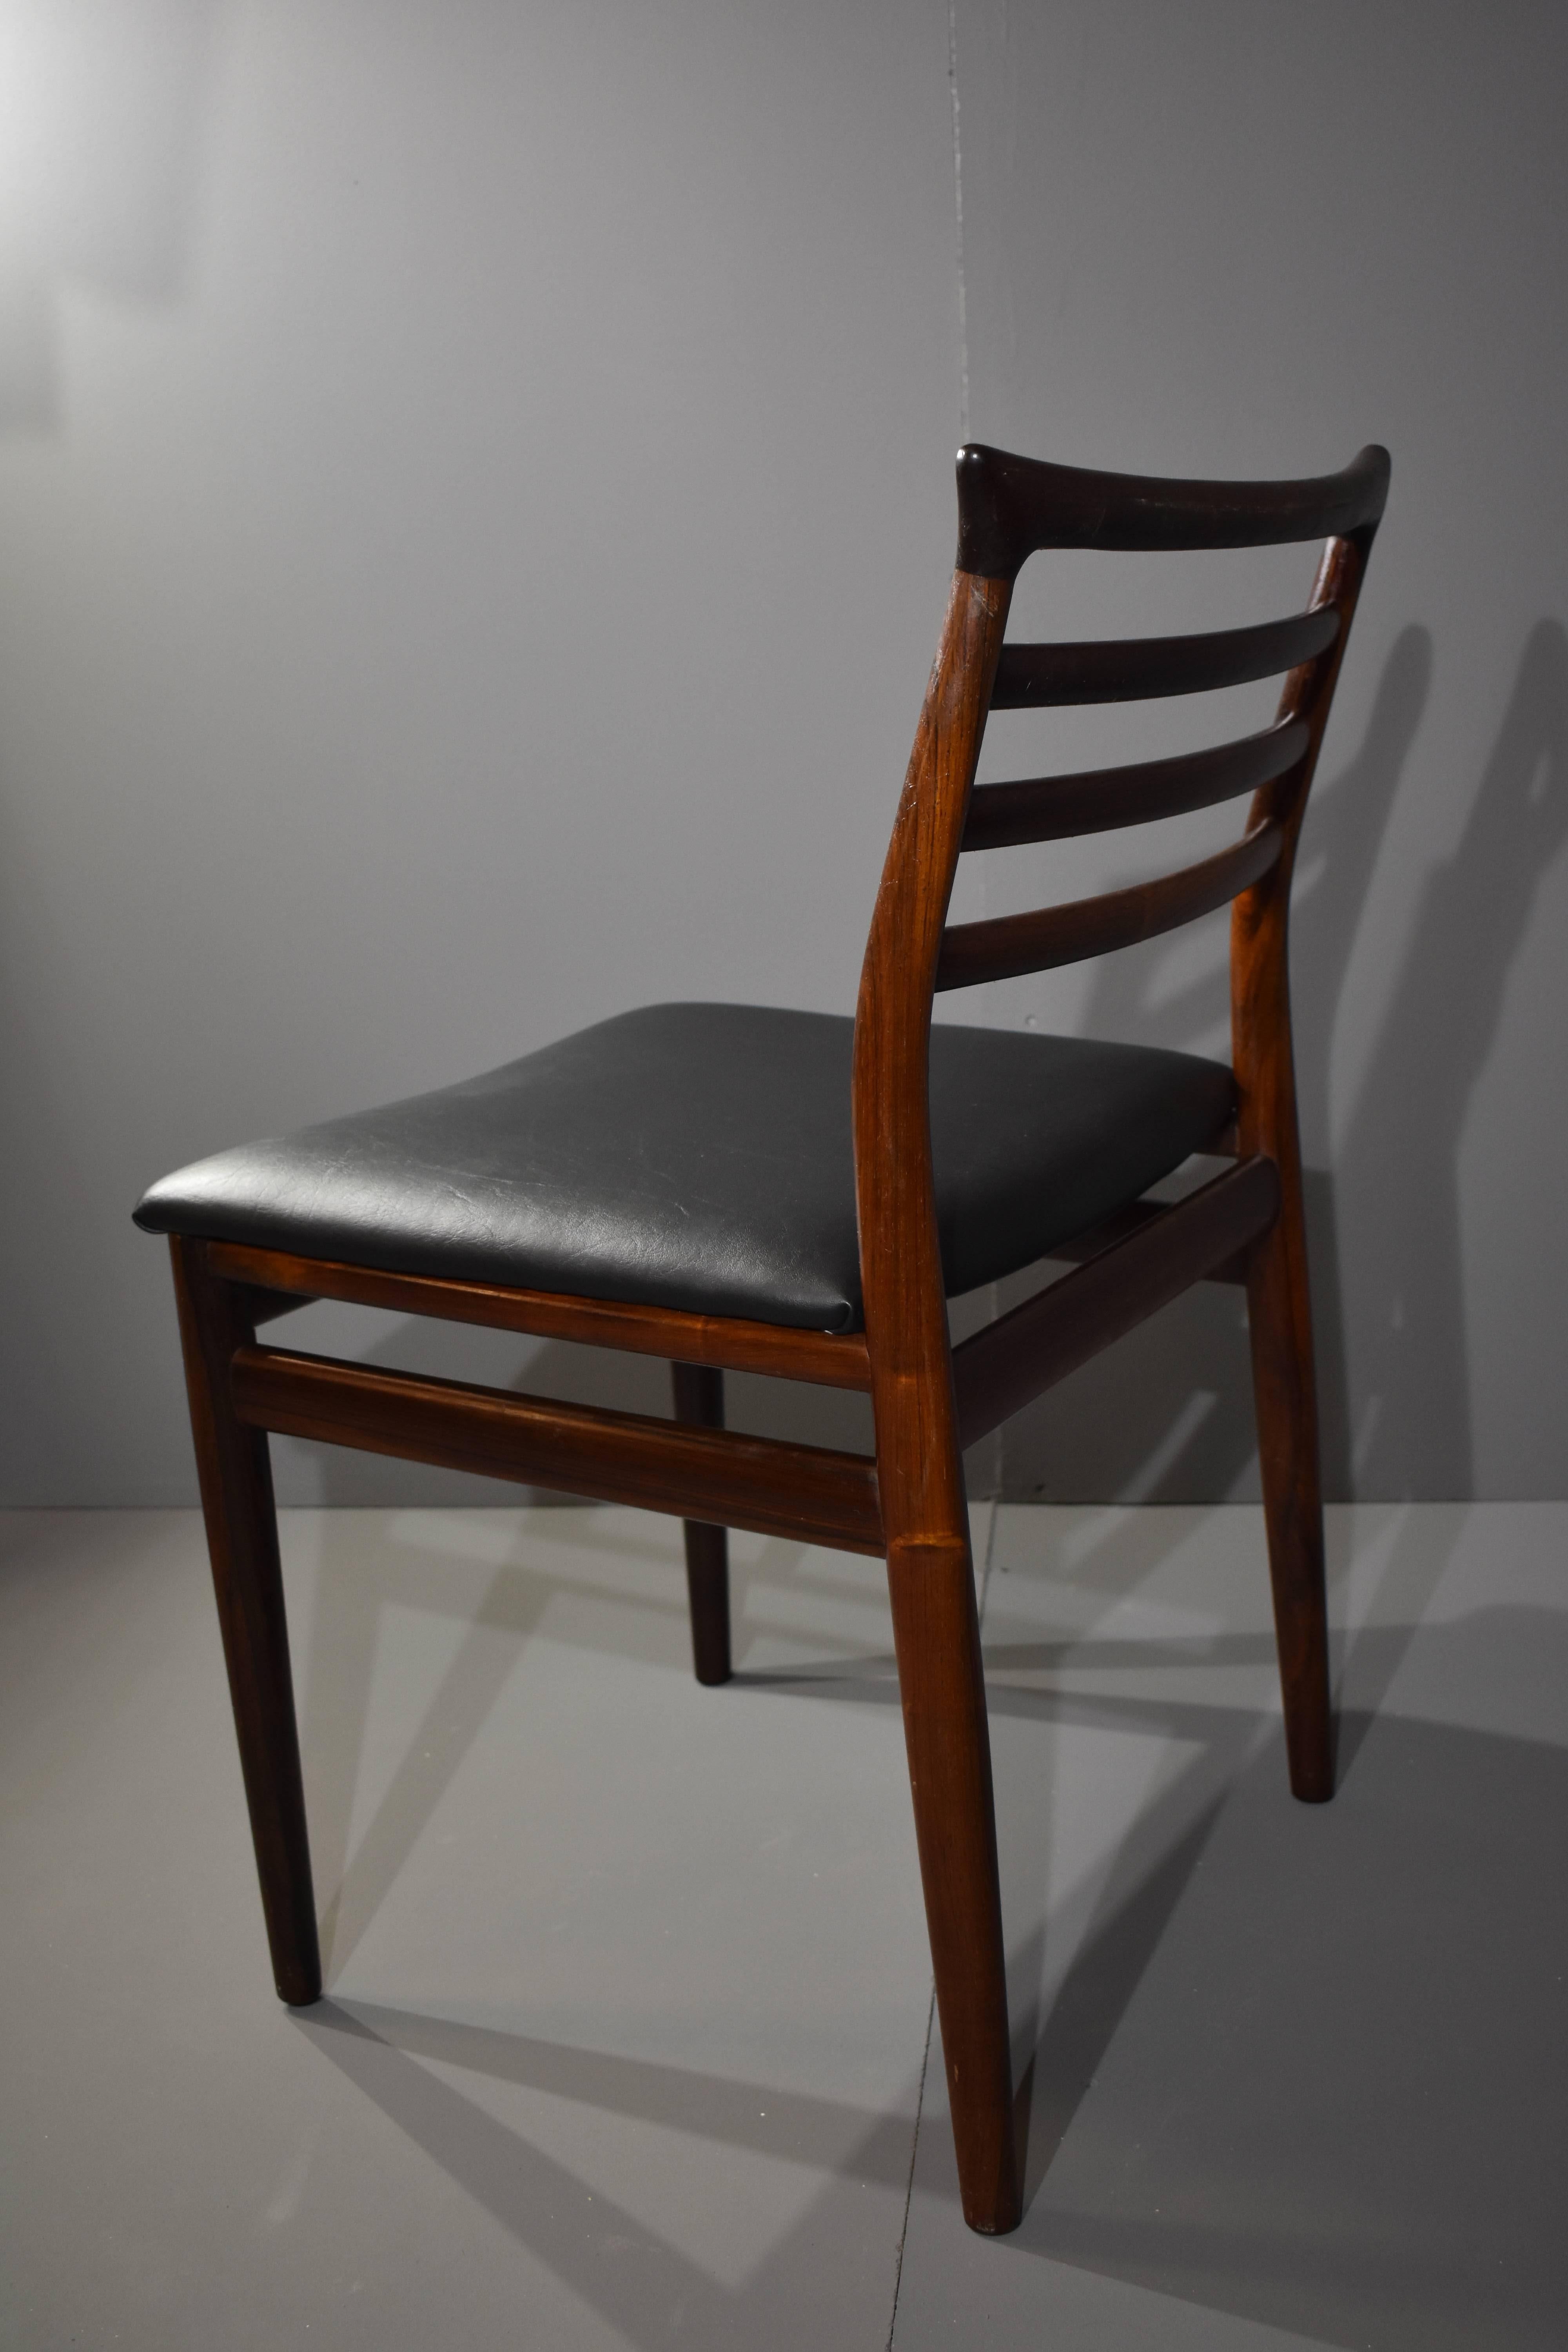 Erling Torvits Rosewood Dining Chairs In Excellent Condition For Sale In Odense, DK